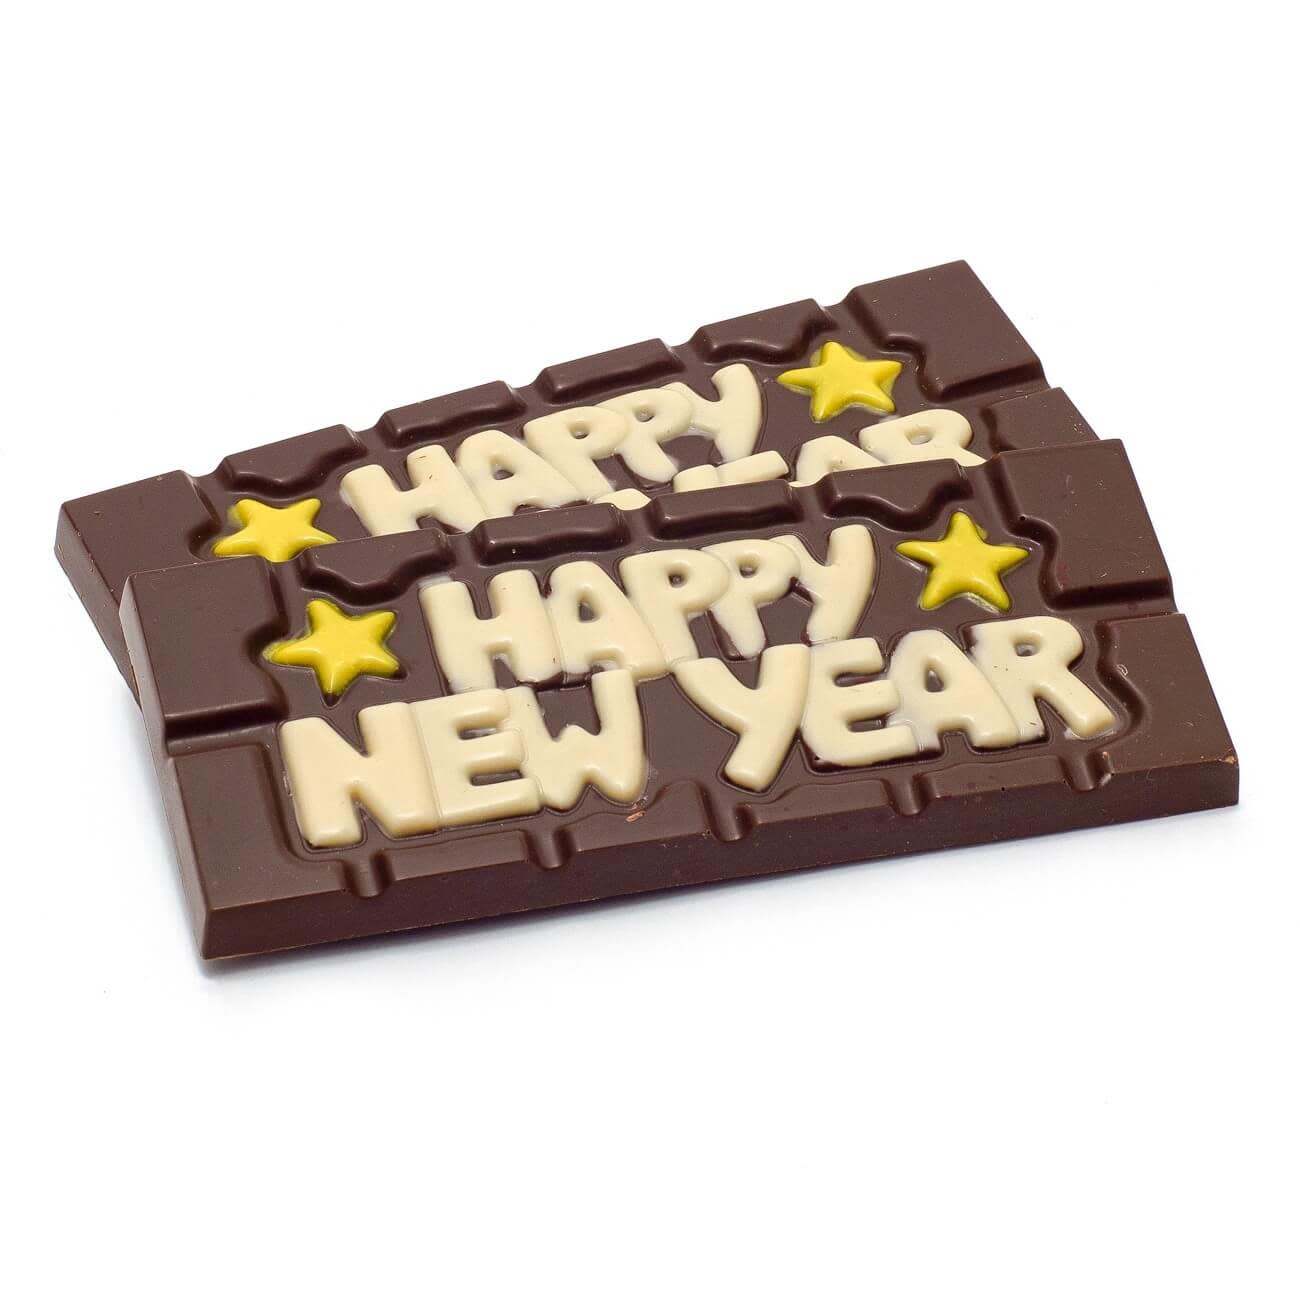 happy new year with chocolate